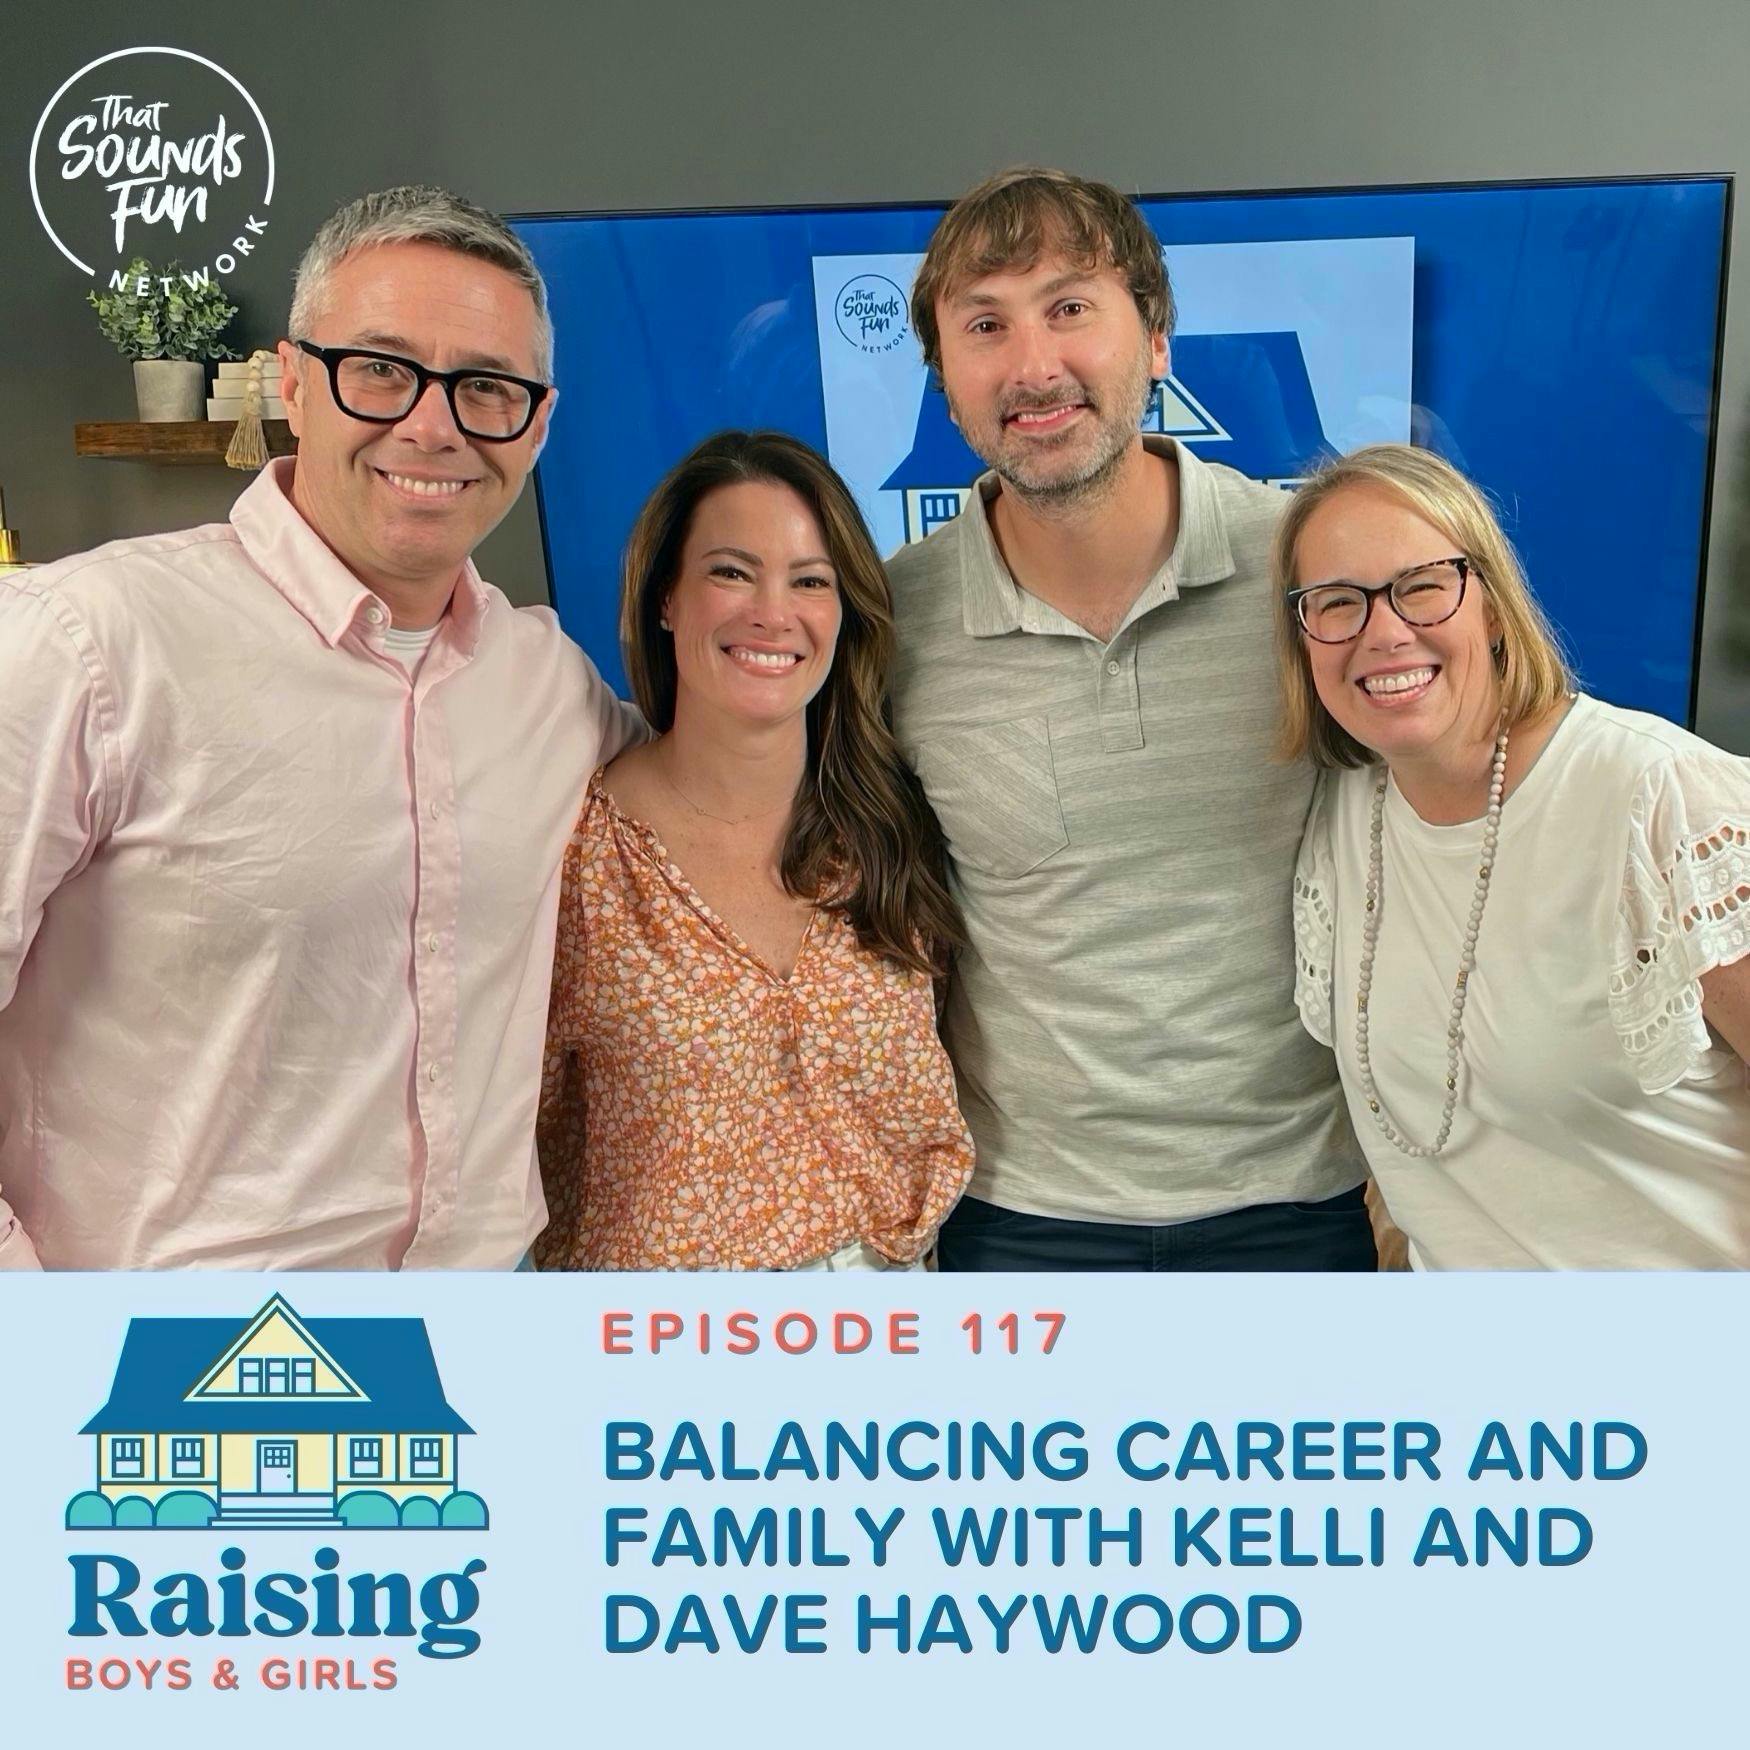 Episode 117: Balancing Career and Family with Kelli and Dave Haywood